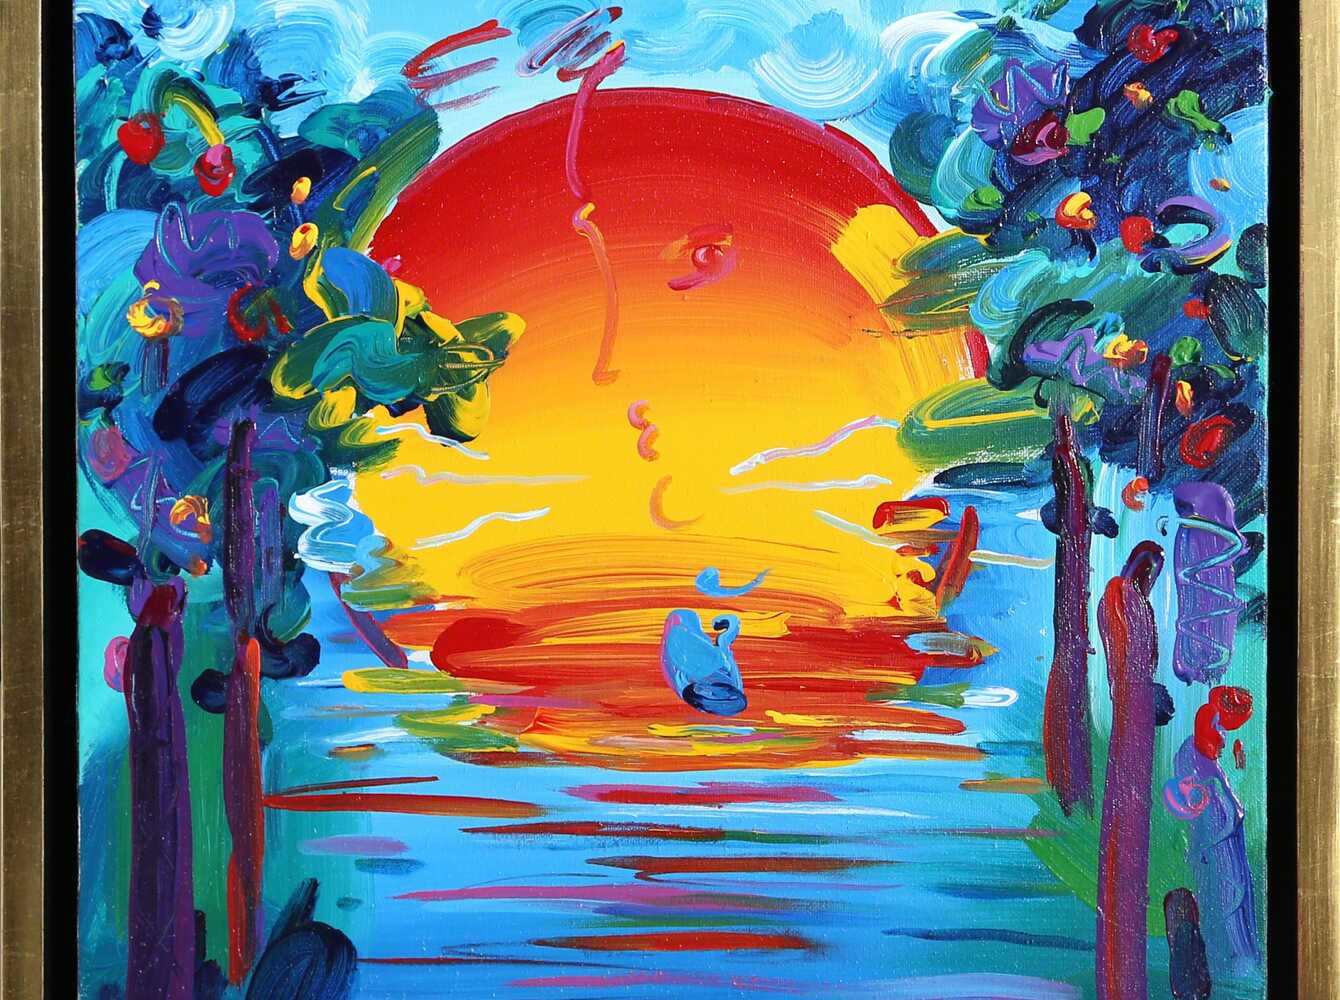 Peter Max’s Sun - For Sale on Artsy